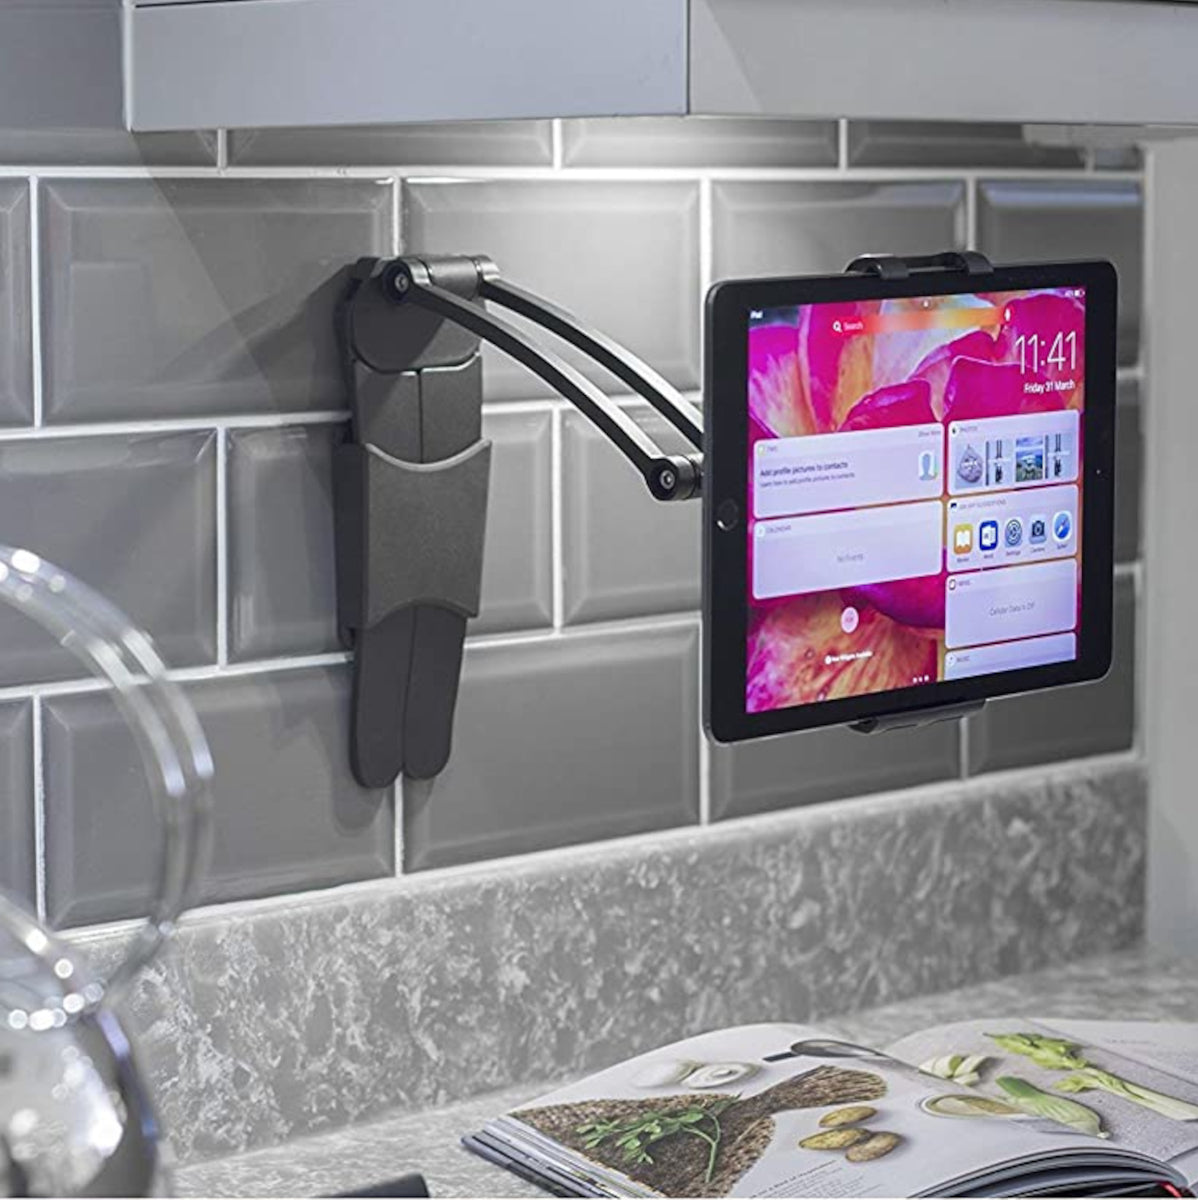  A kitchen with an Apple Ipad Pro held on a wall mounted tablet stand.  The 5mm alen bolts which lock the angles can be seen on the side of the stand in 2 places.  The tablet is around 30cm from the wall. The wall has grey subway tiles with white grout.  A recipe book showing parsley, mushrooms, new potatoes and some greens is open on the kitchen counter 